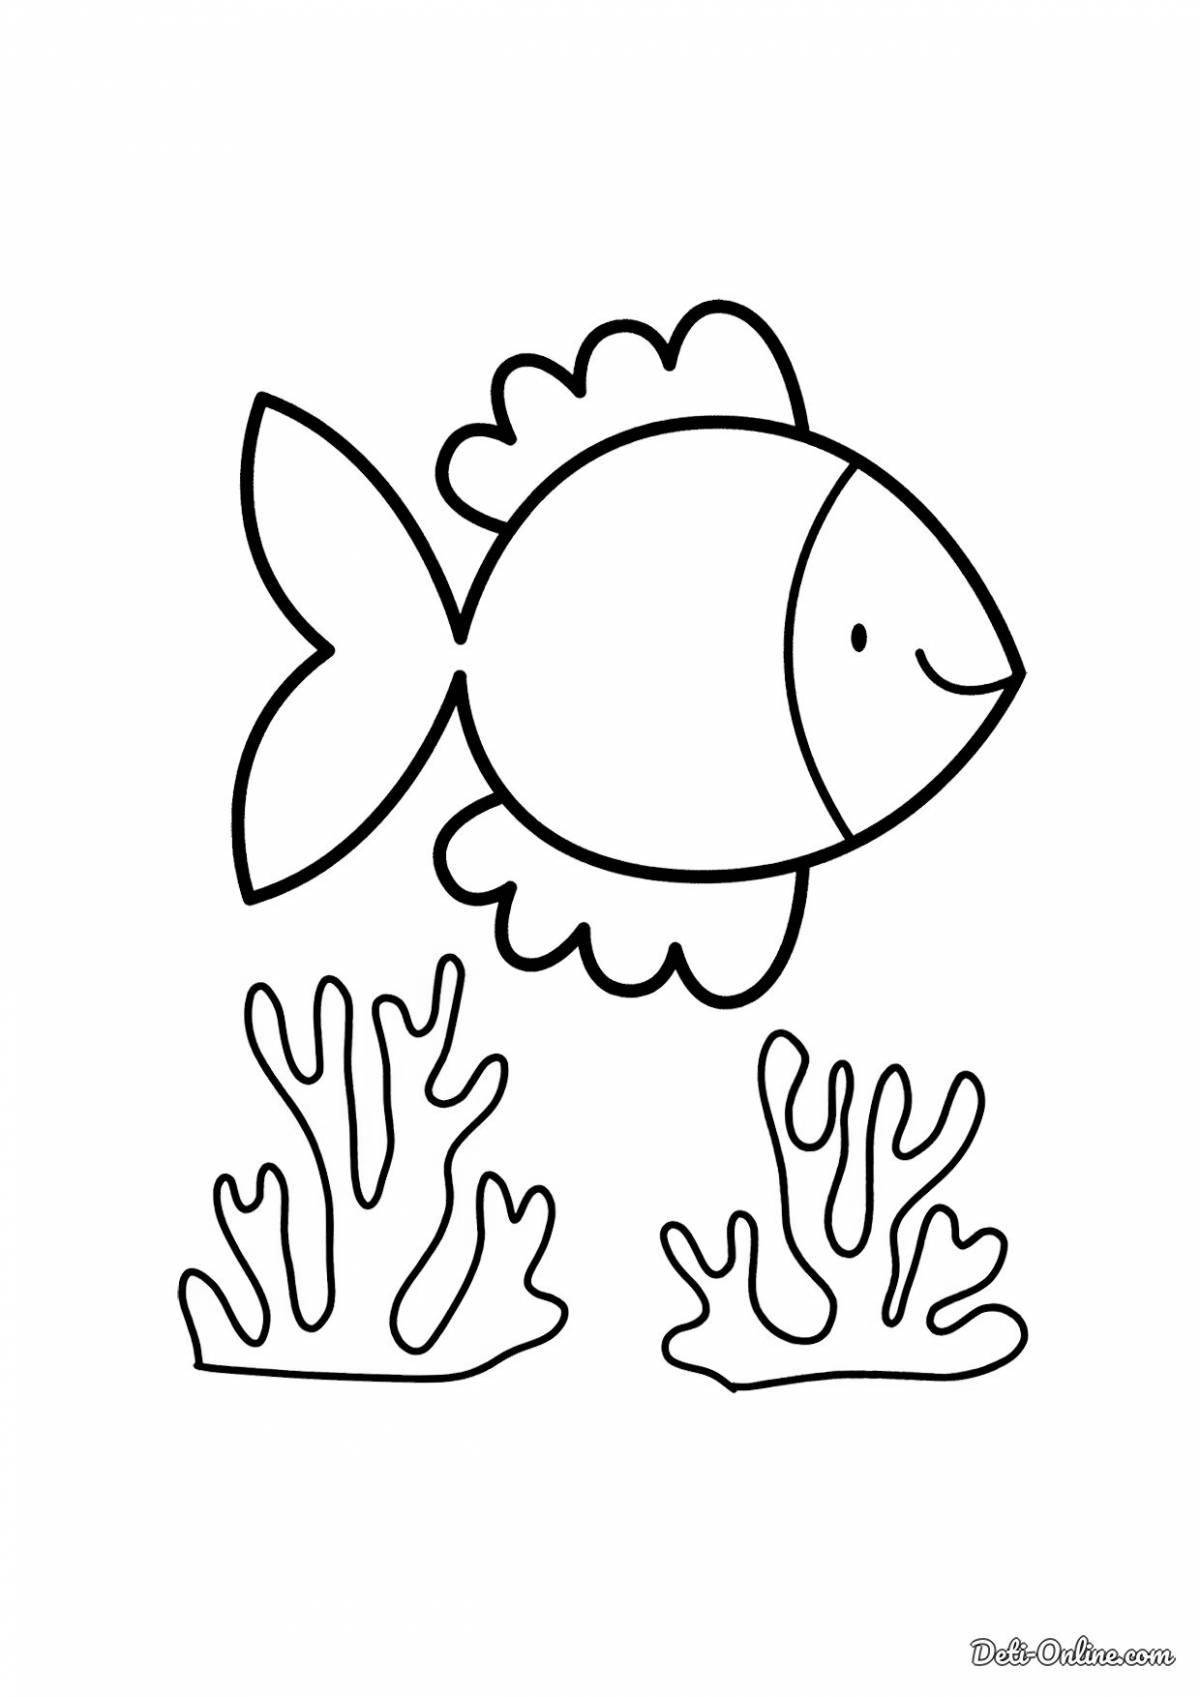 Coloring book playful fish with algae